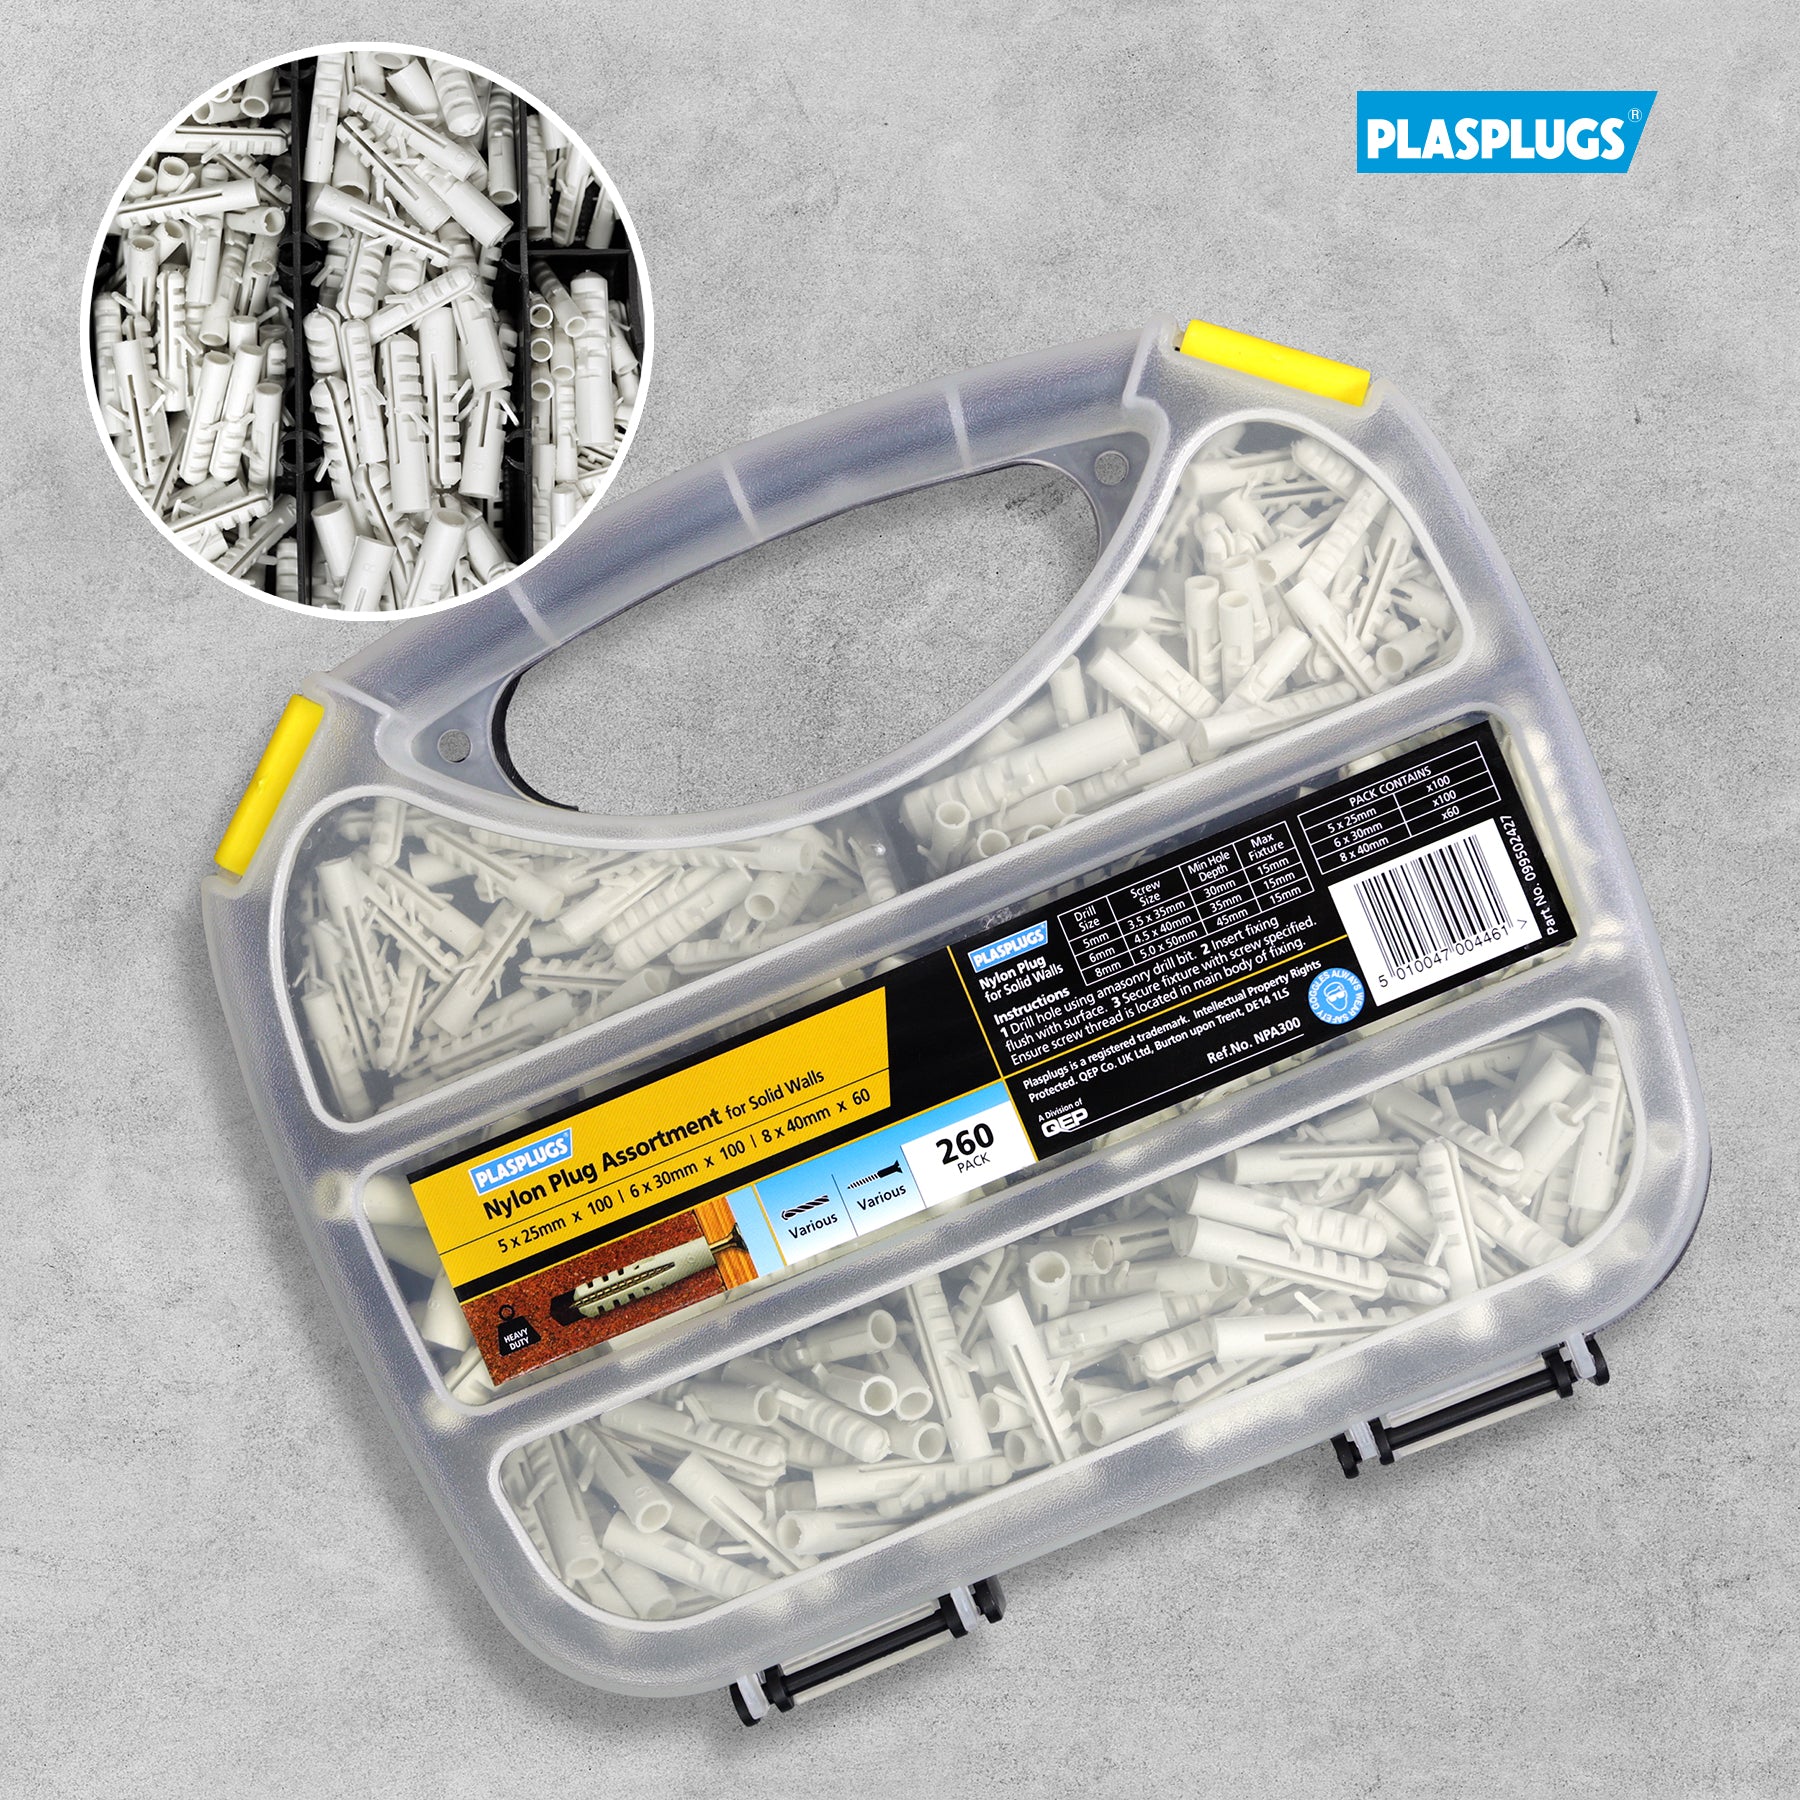 Nylon Plug Assortment - 260 Pack by Plasplugs, sold by in-Excess